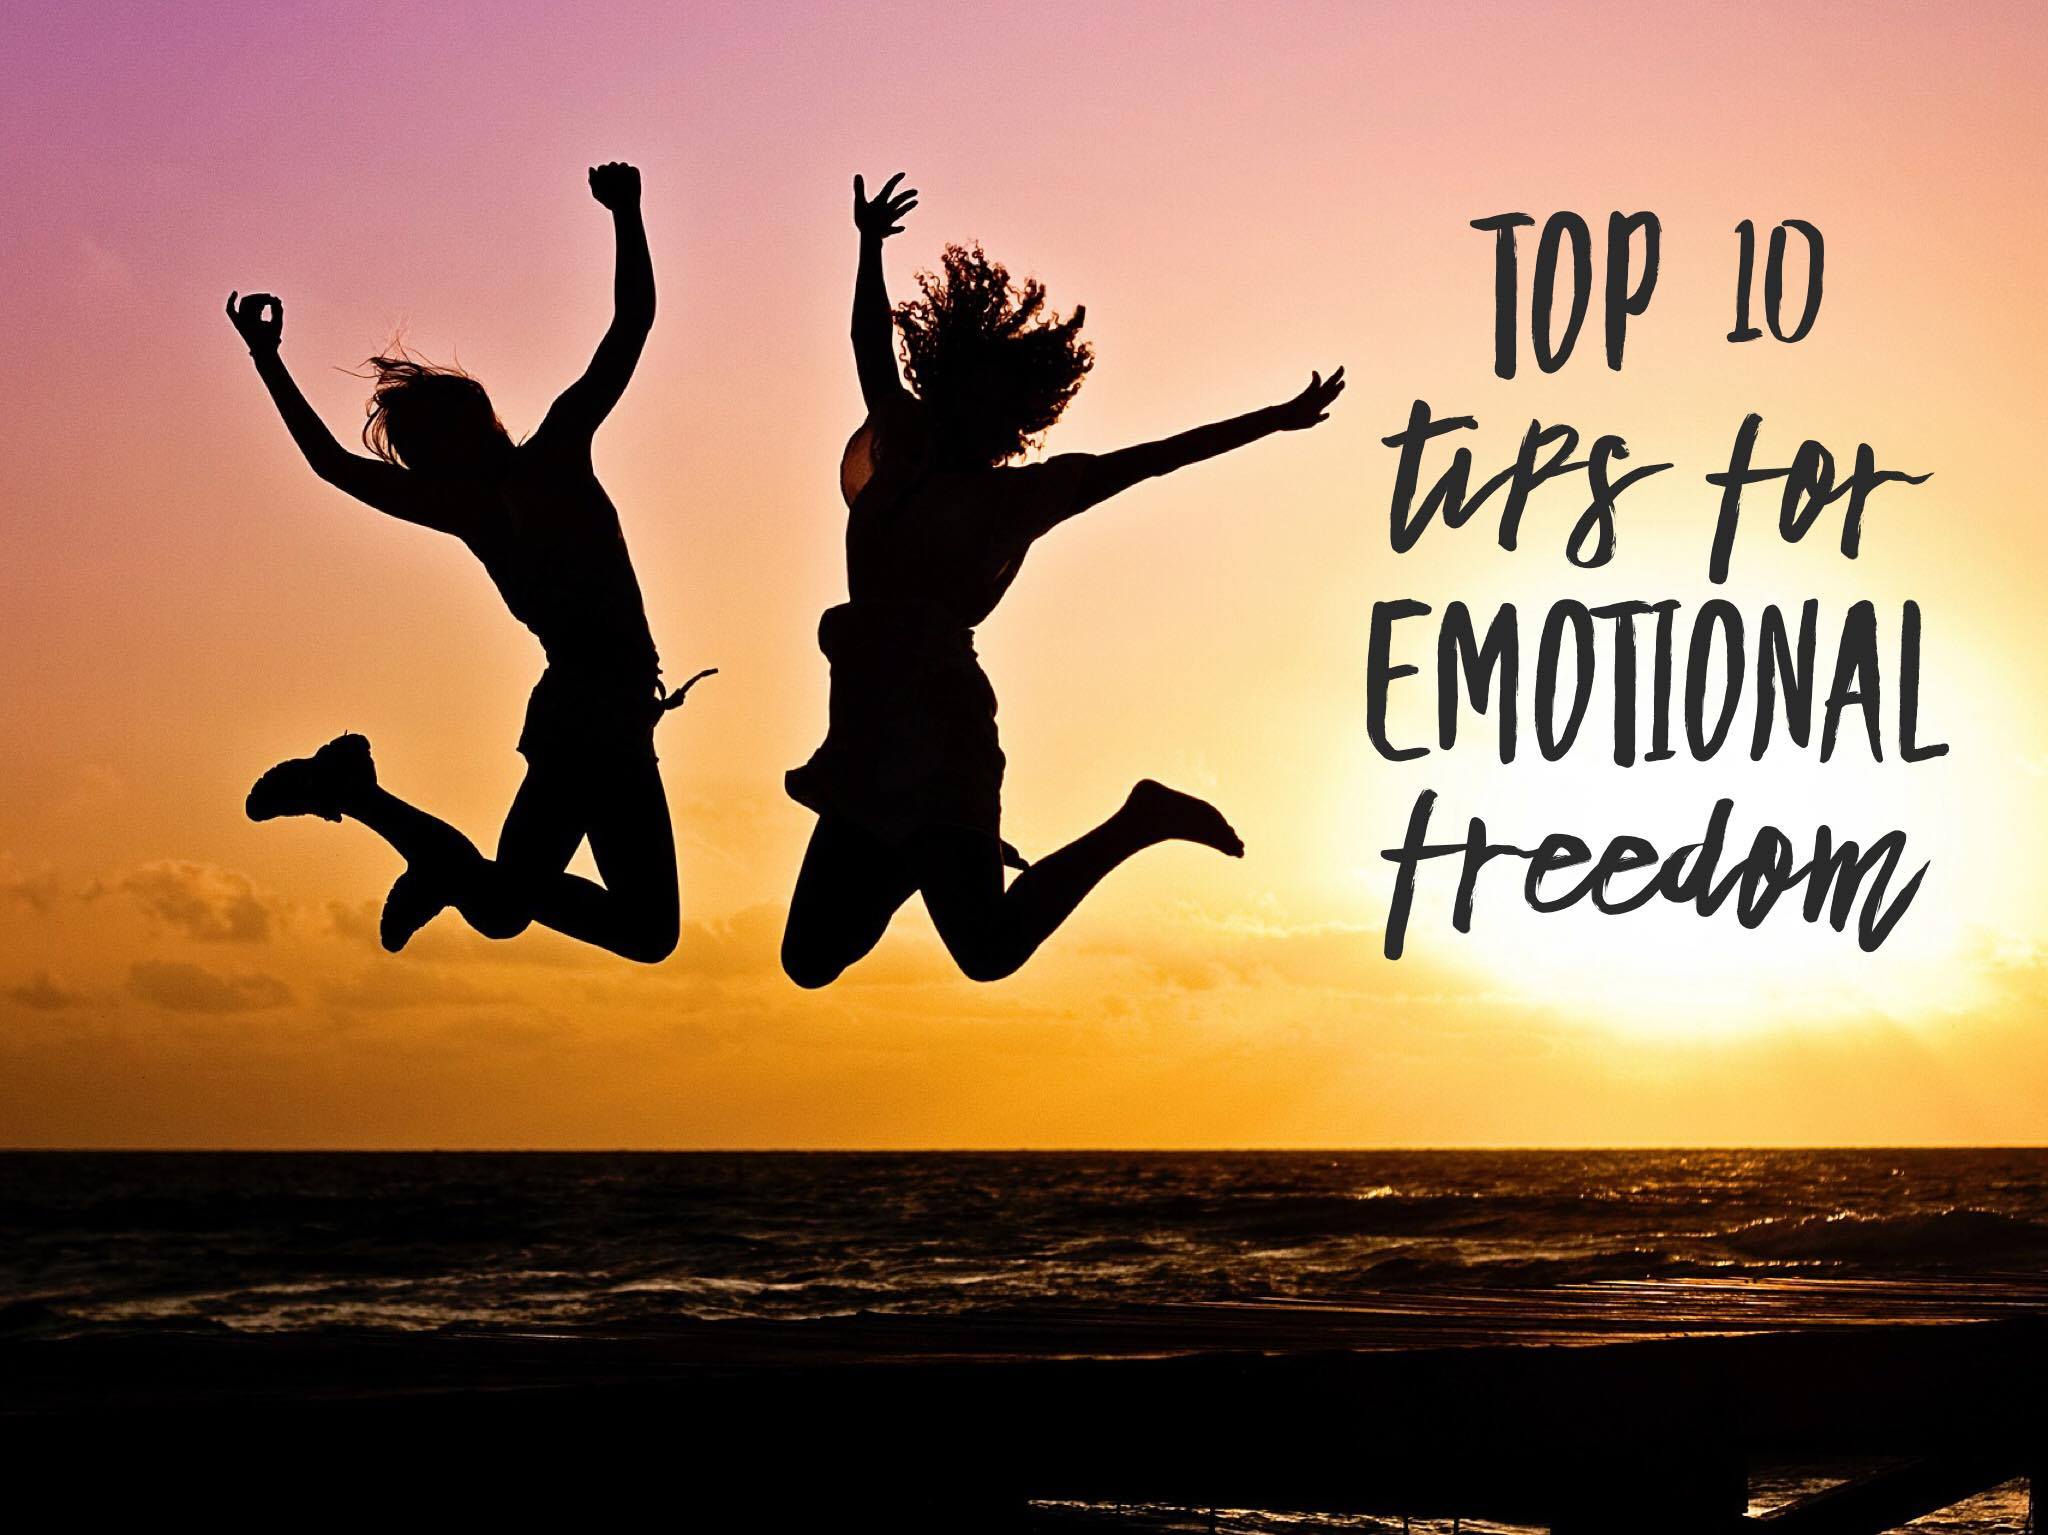 How I Found Emotional Freedom (Top 10 Tips)